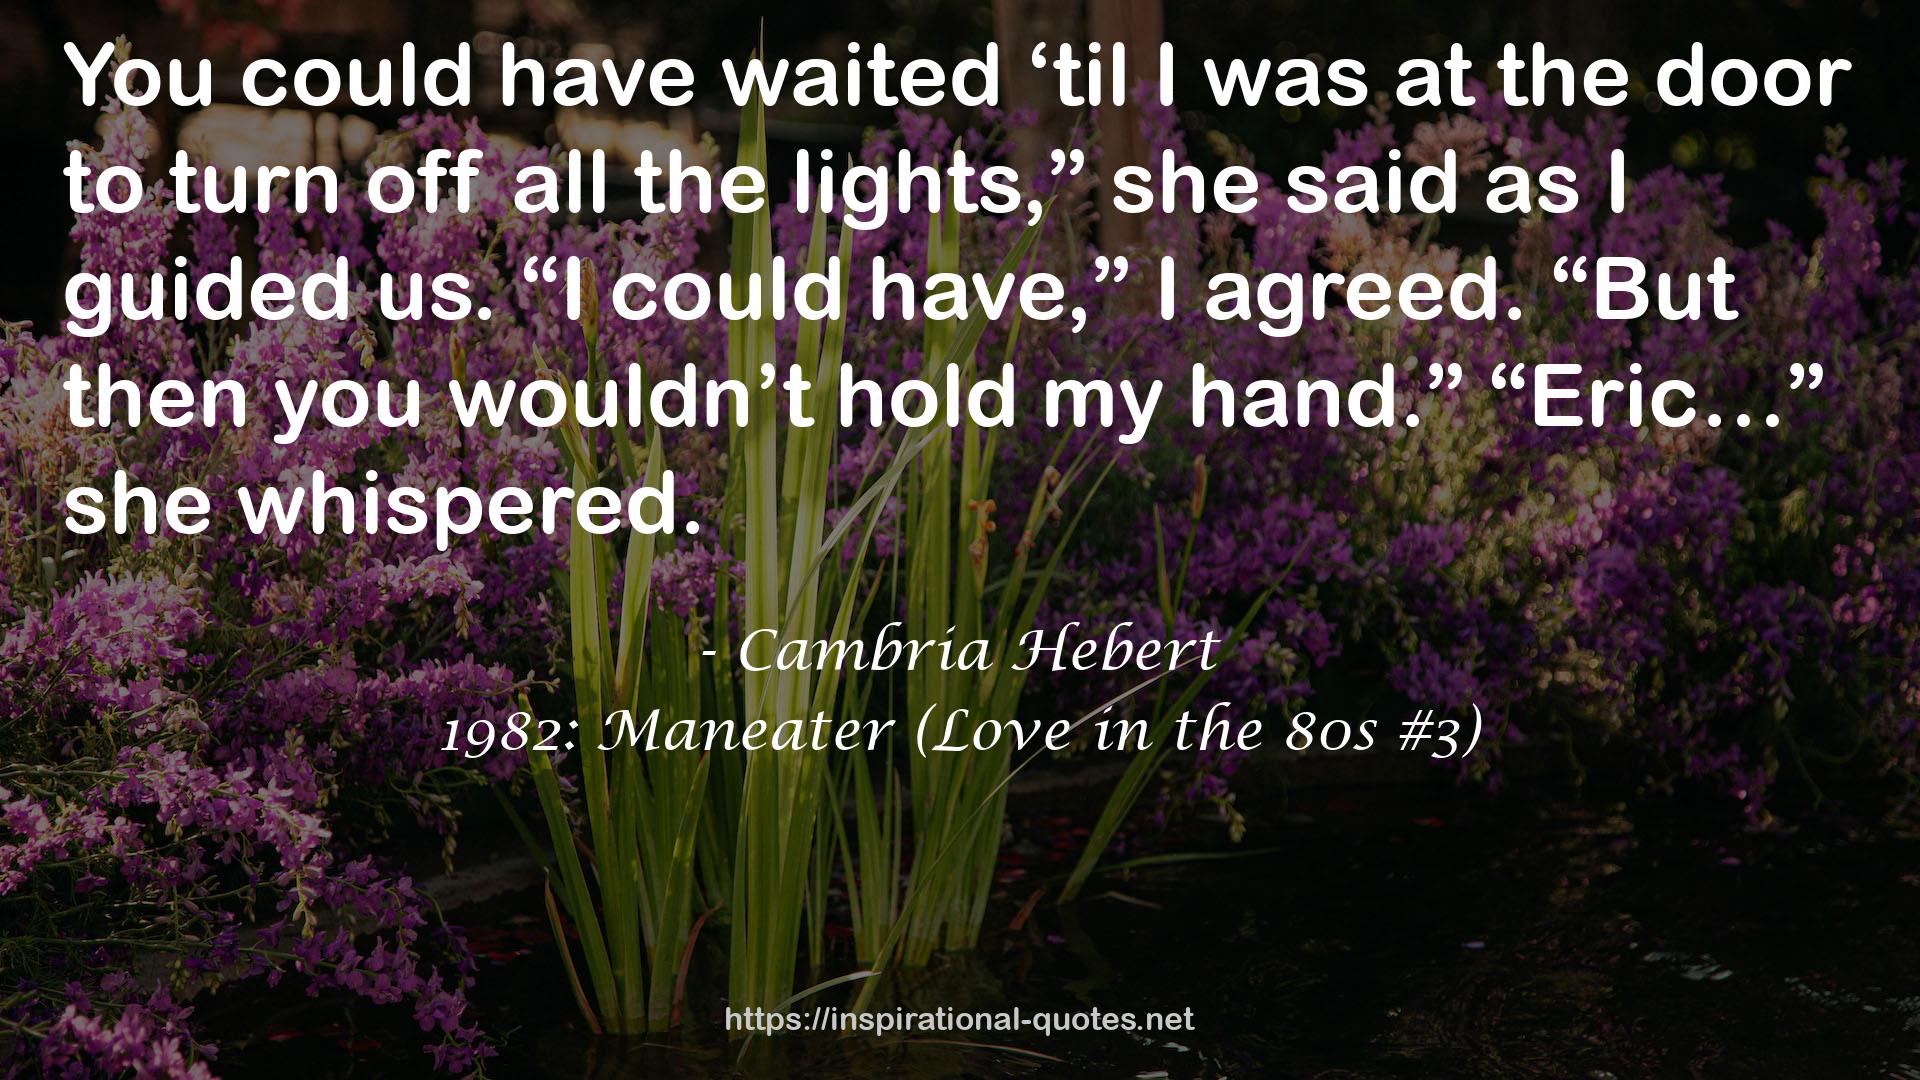 1982: Maneater (Love in the 80s #3) QUOTES